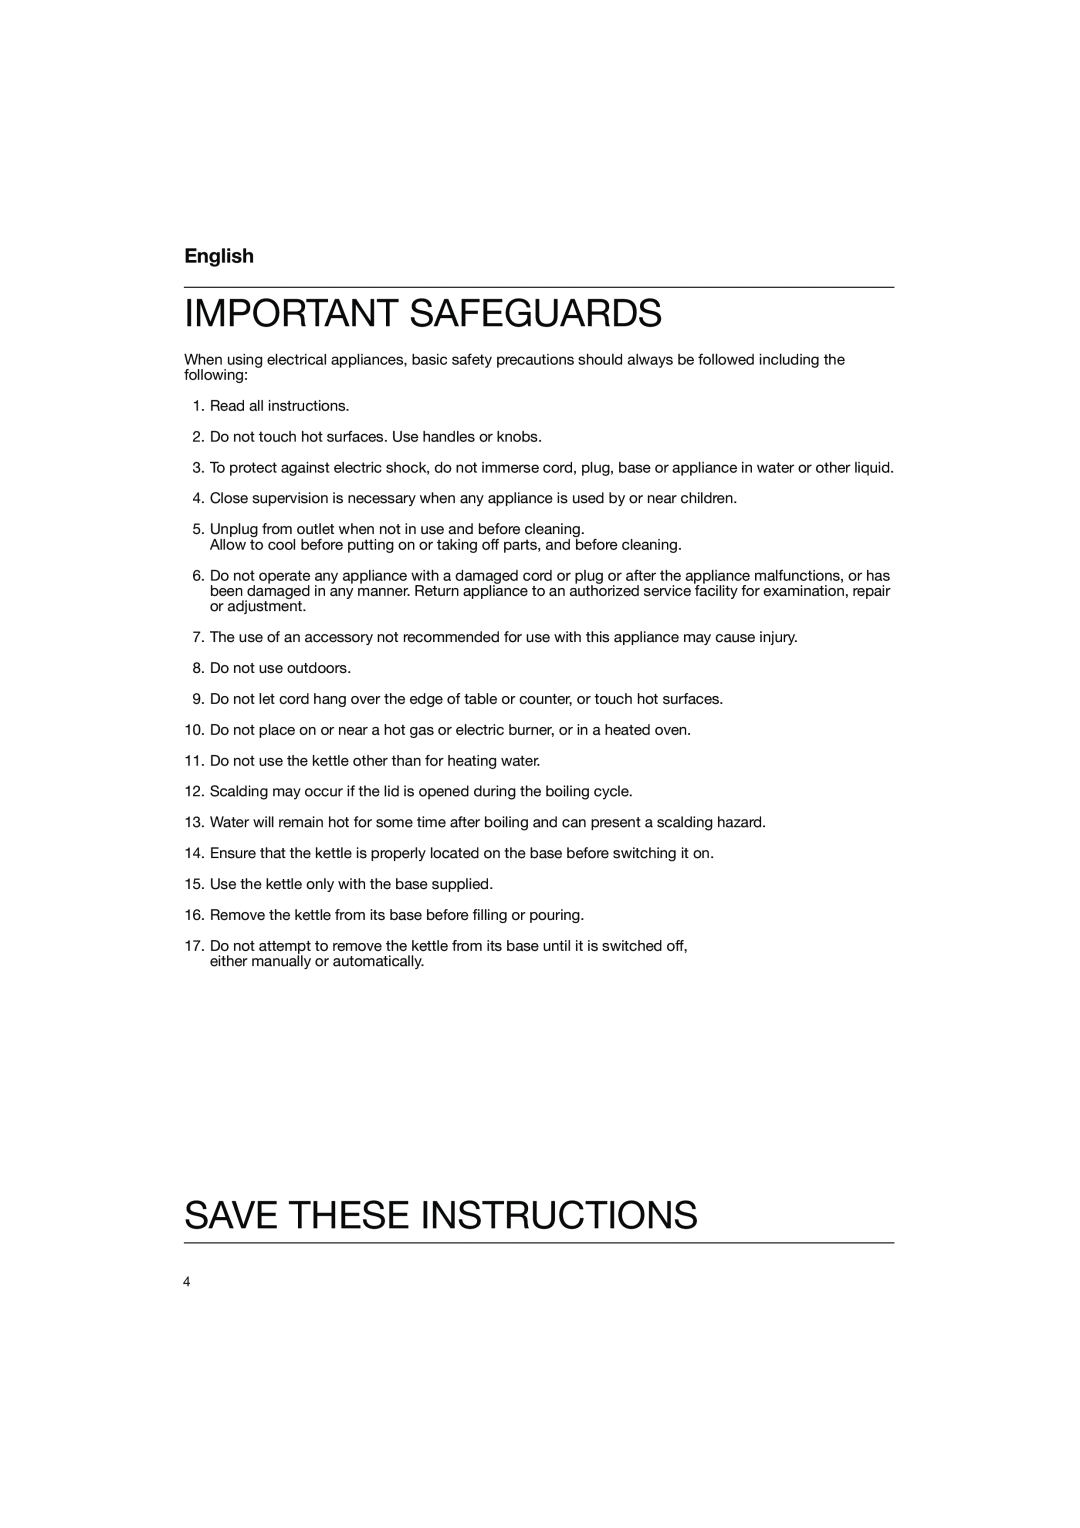 Braun WK 600 manual Important Safeguards, Save These Instructions, English 